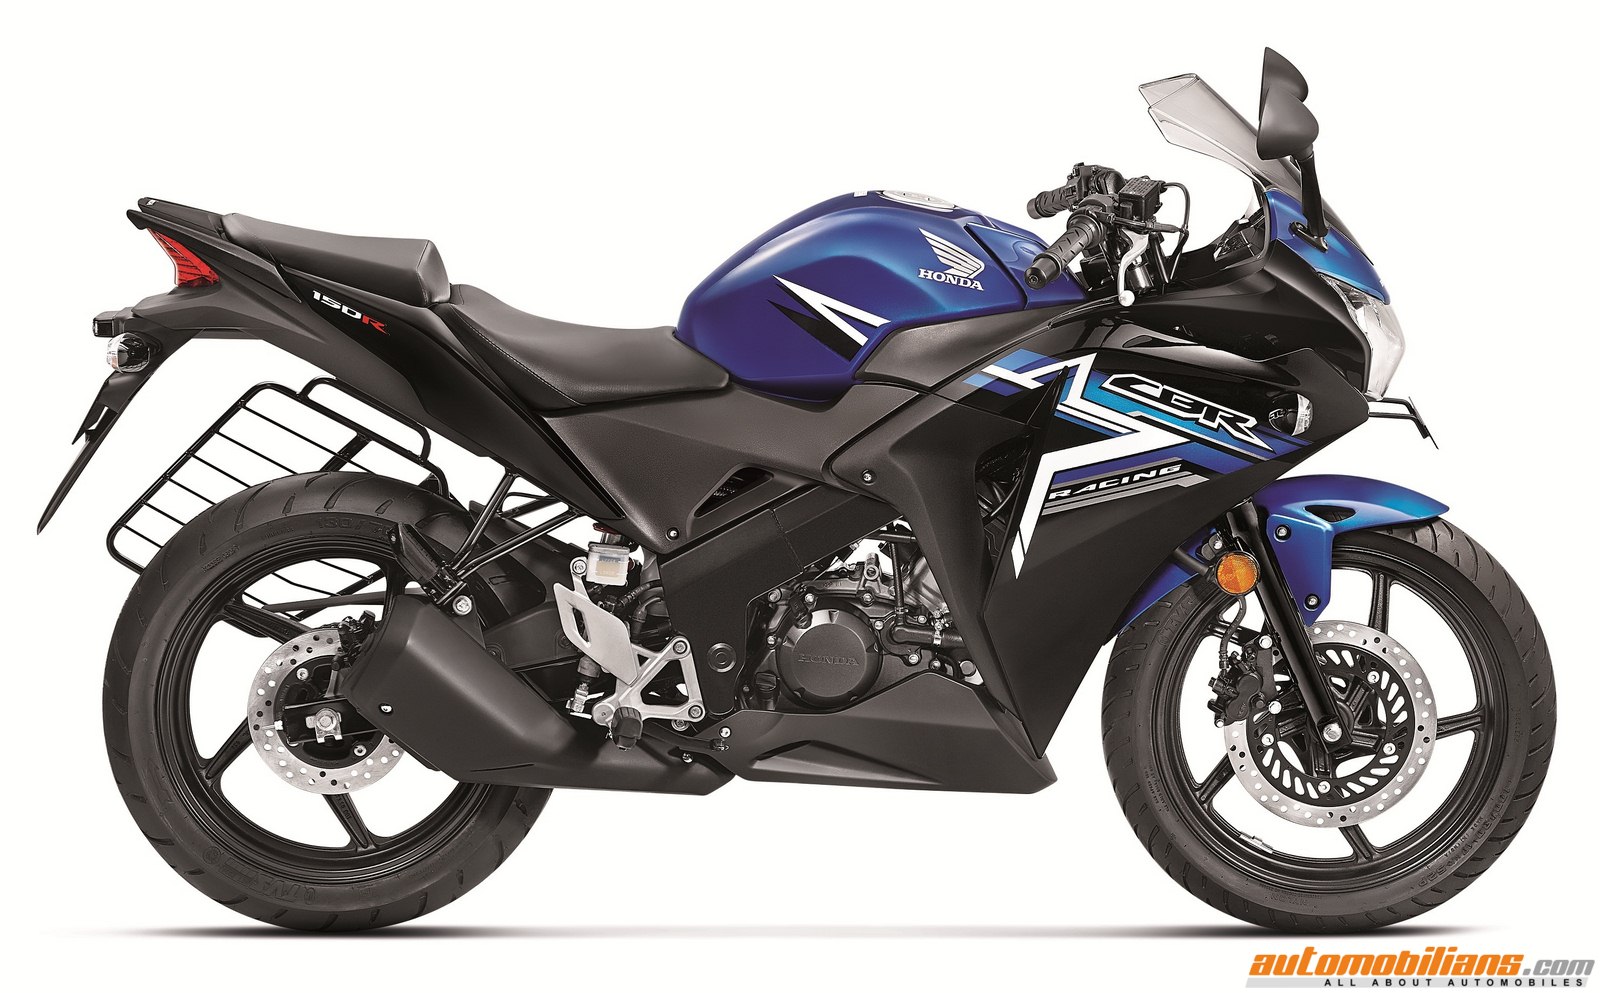 New Honda CBR 150R & CBR 250R Launched In India At Rs. 1.30 Lakhs & Rs. 1.69 Lakhs Respectively (Ex-Showroom, Mumbai)